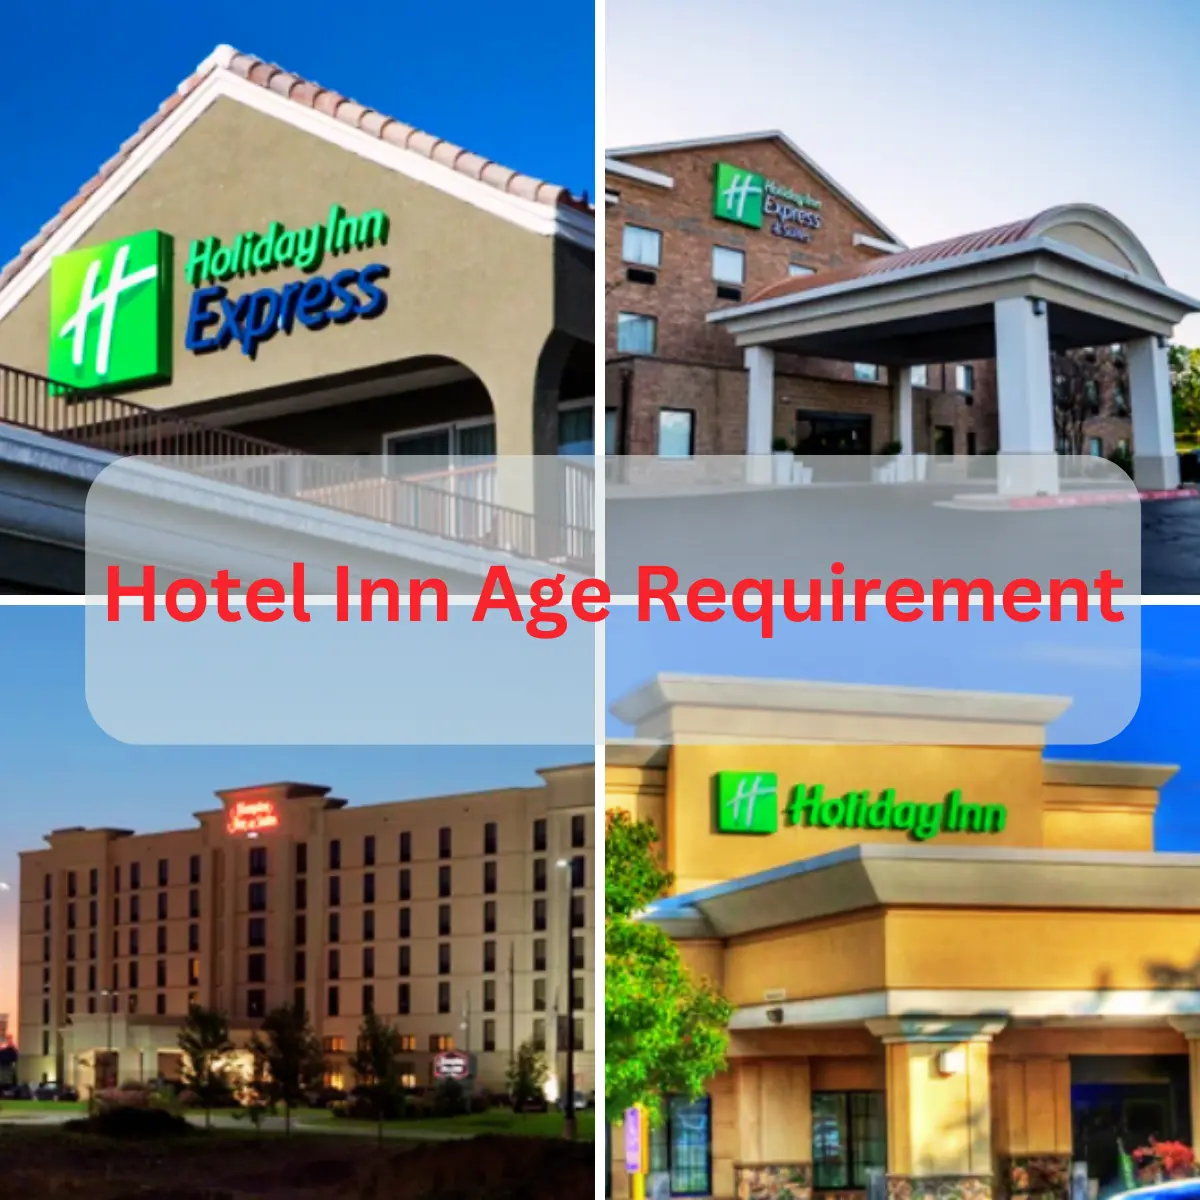 Hotel Inn Age Requirement